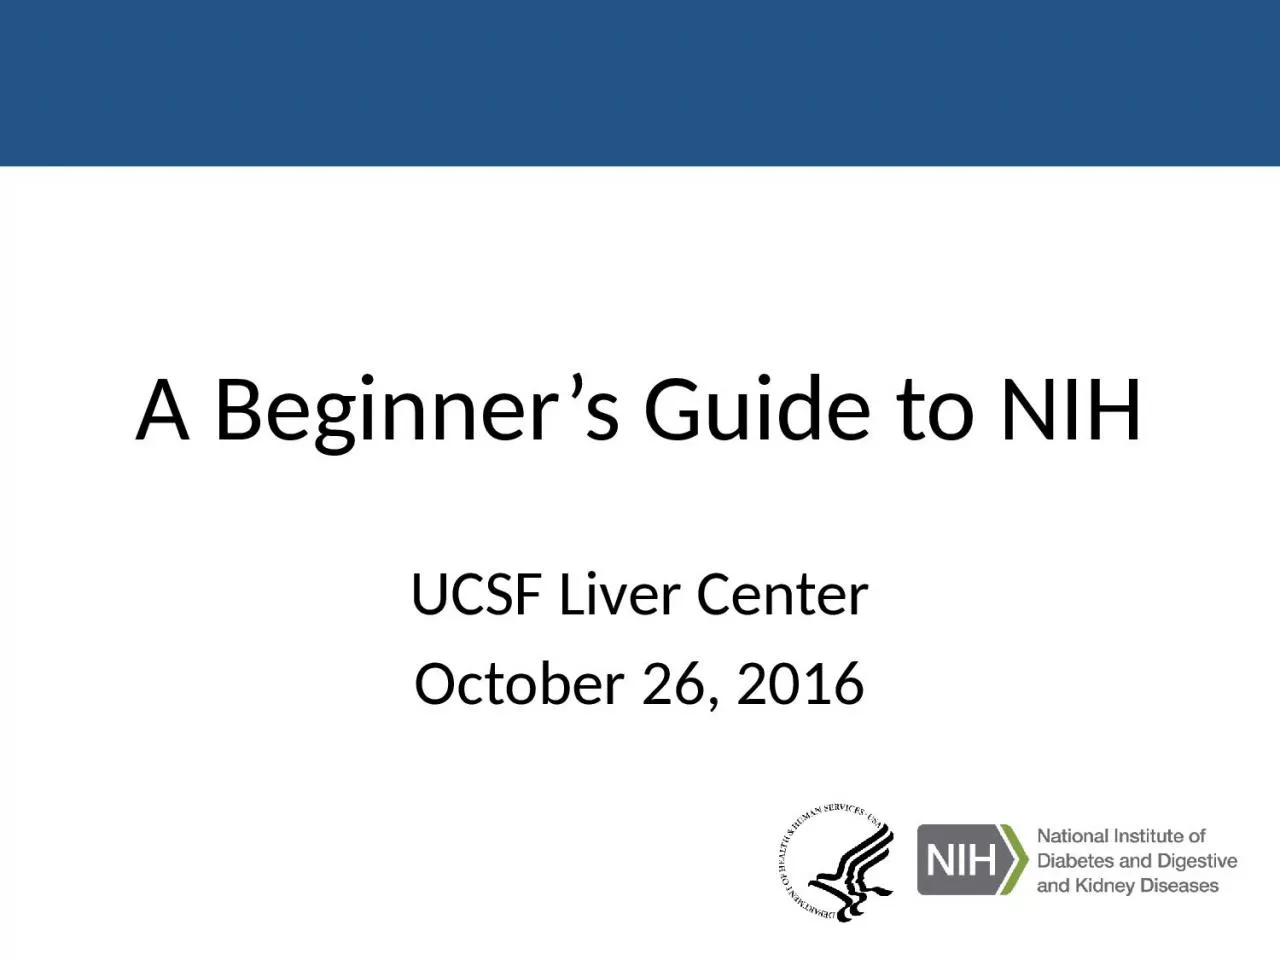 A Beginner’s Guide to NIH